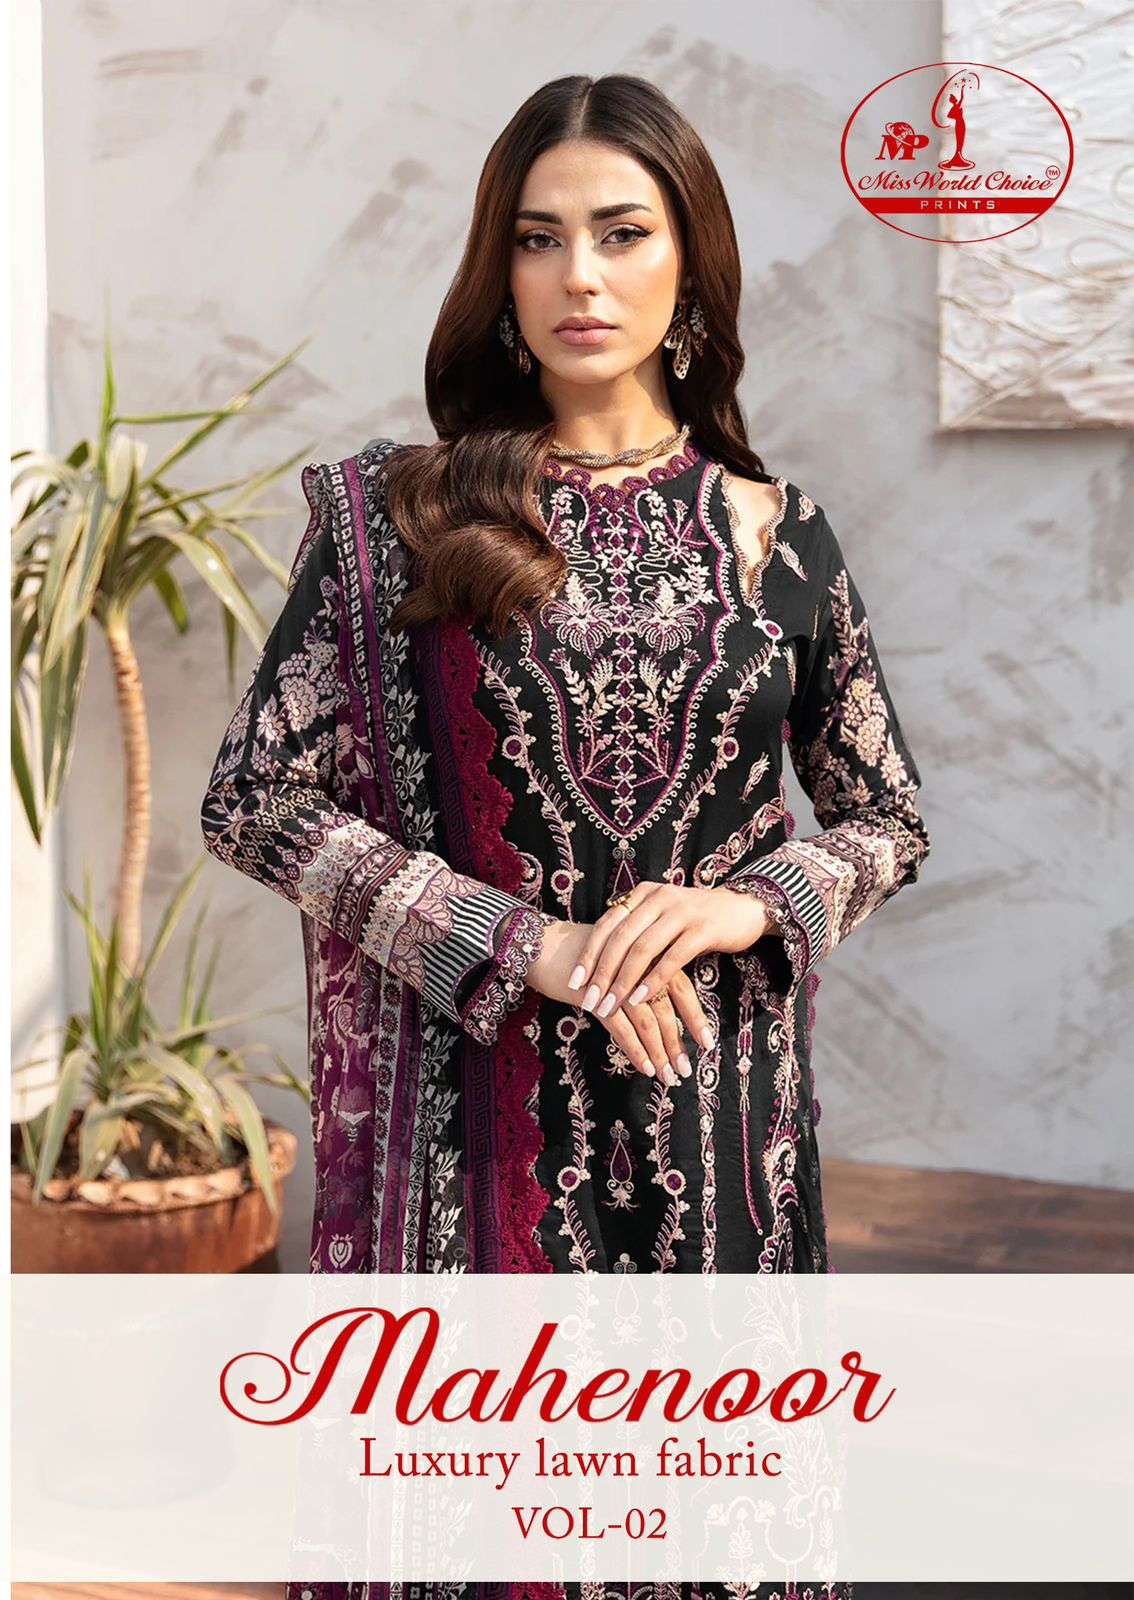 Miss World Choice Mahenoor Vol 2 Luxury Lawn Collection Unstitch Suit Suppliers